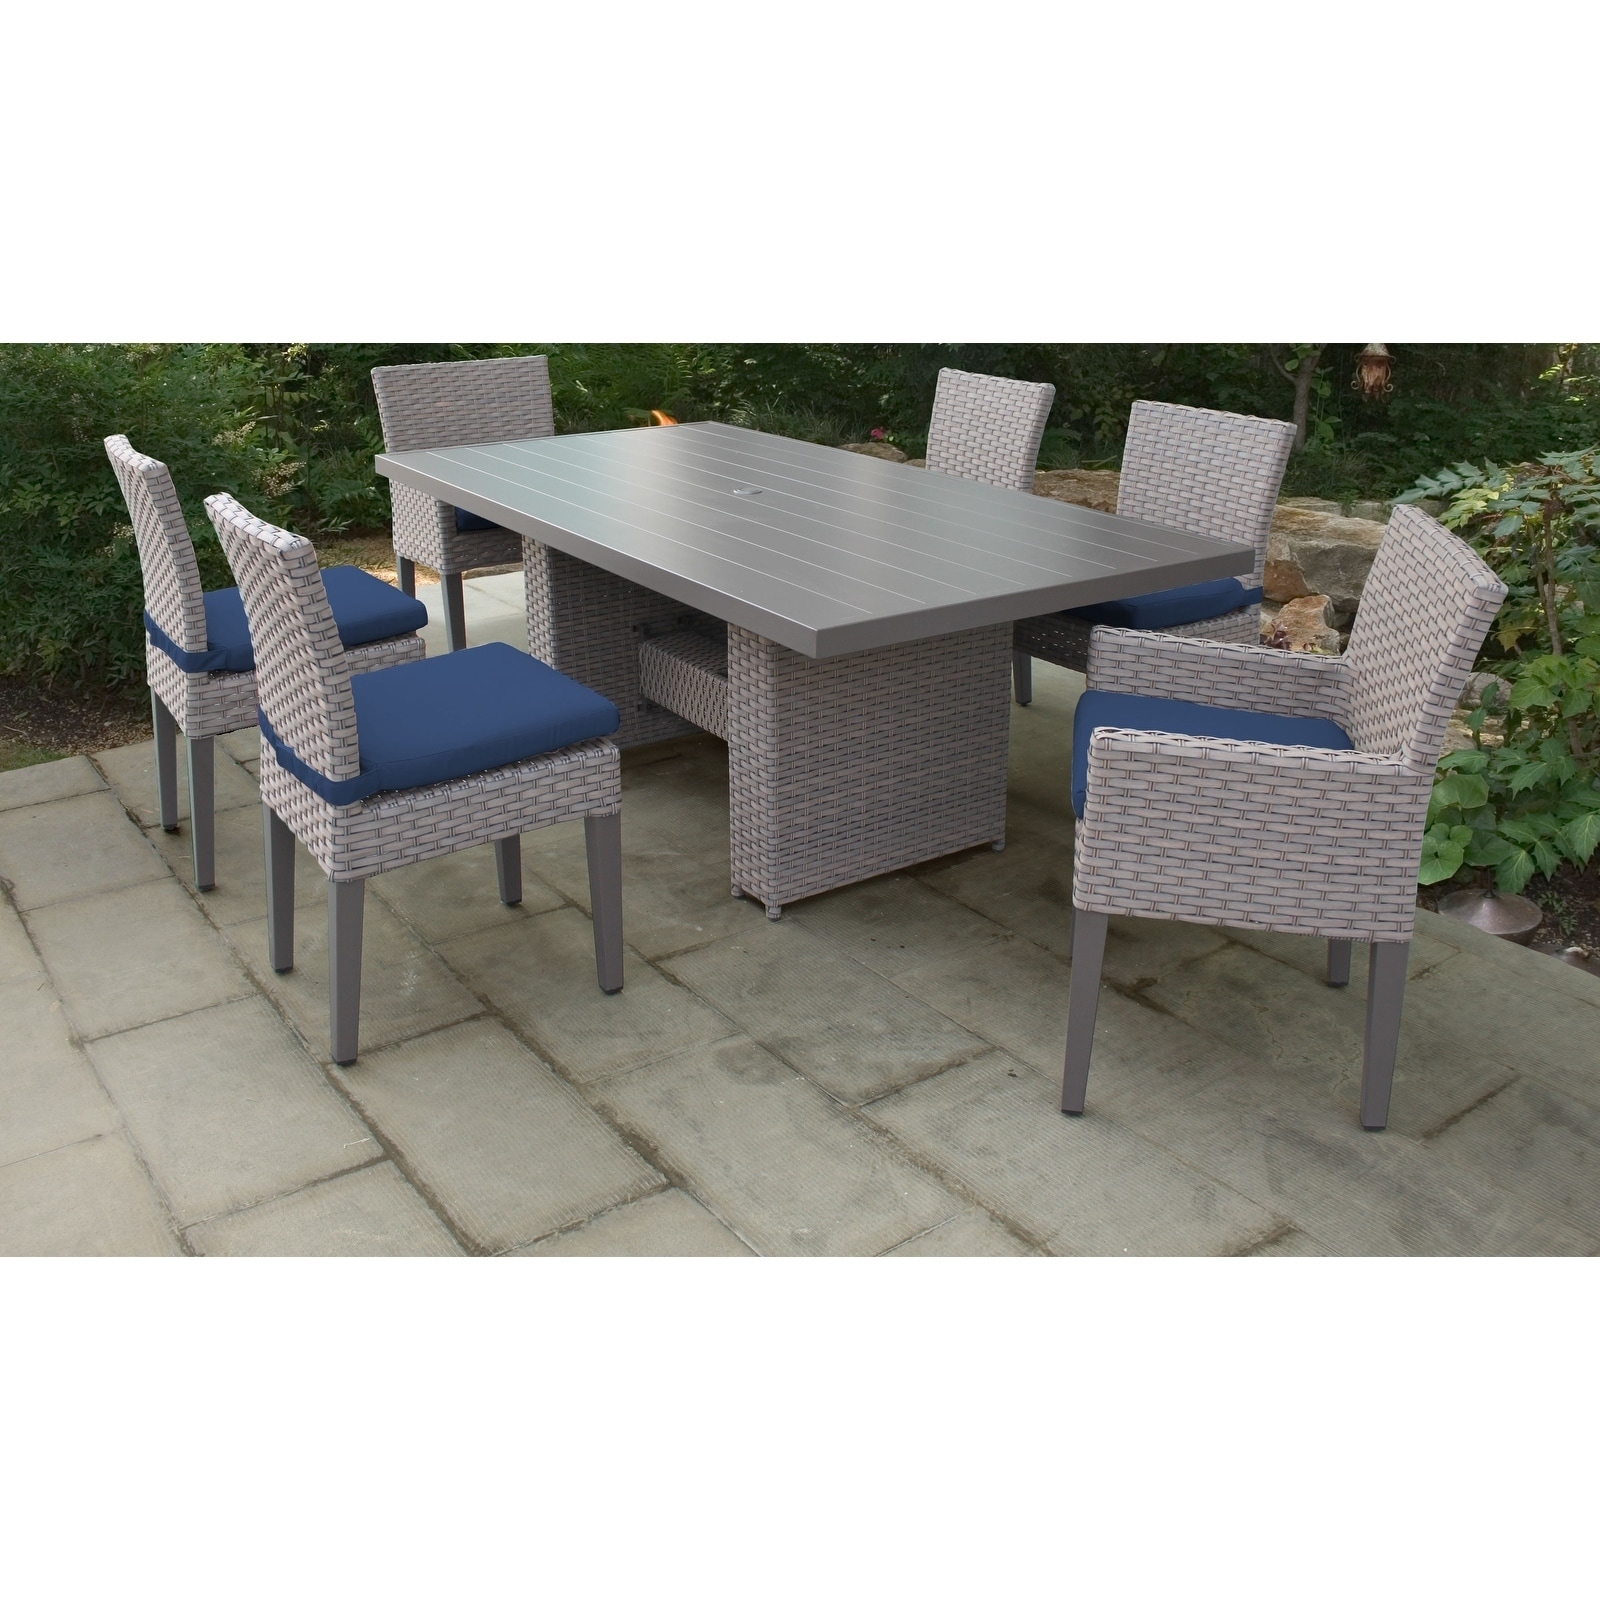 Florence Rectangular Outdoor Patio Dining Table With 4 Armless Chairs And 2 Chairs W/ Arms